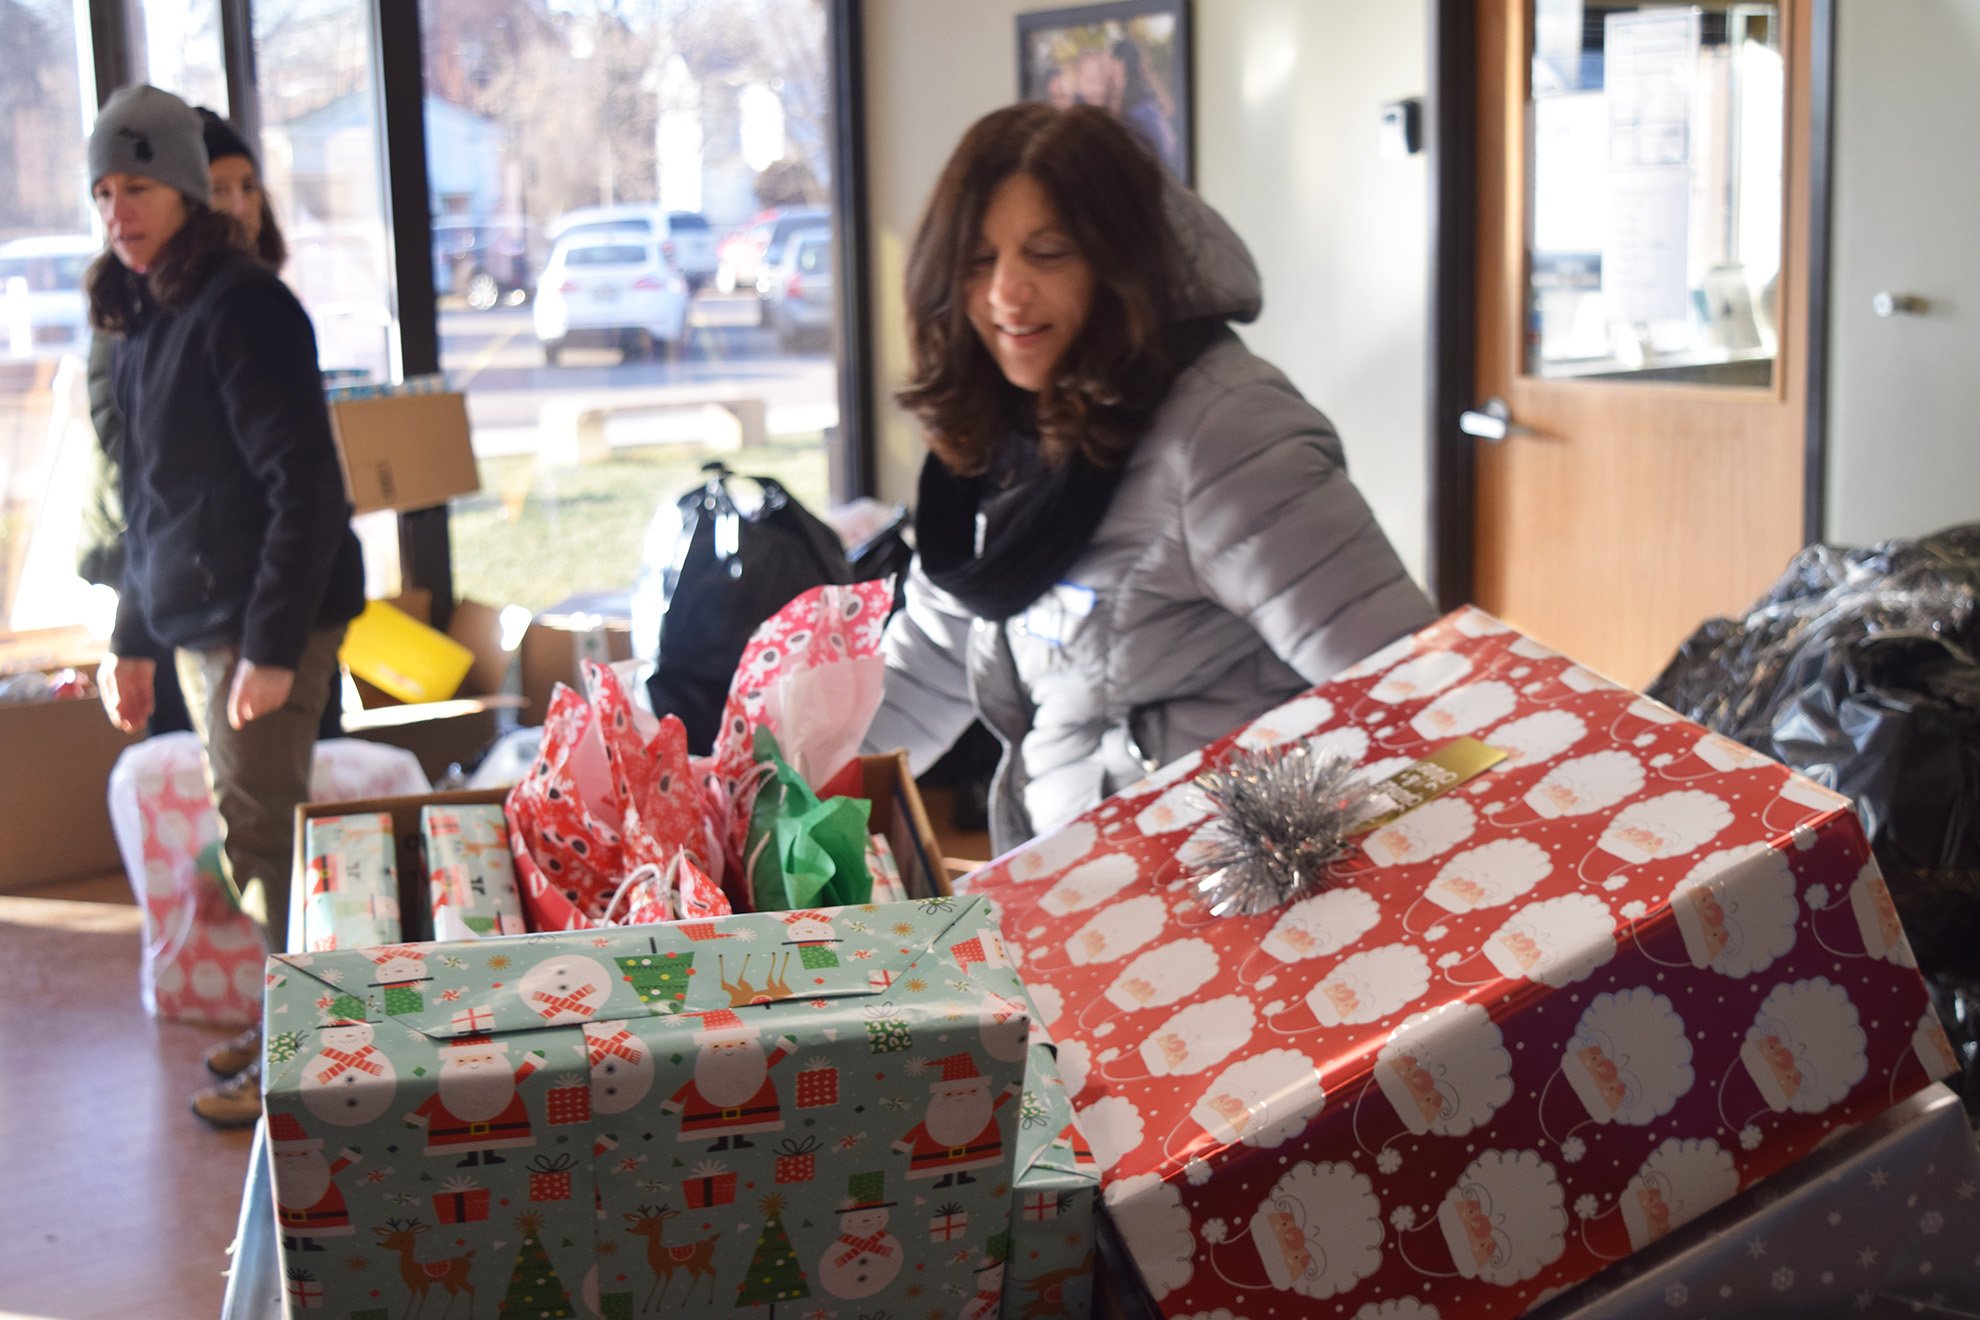  Volunteers organize Adopt A Family gifts in 2019, the last year that Oakland Family Services was able to collect physical gifts. This year marks an exciting return to Adopt A Family tradition! 